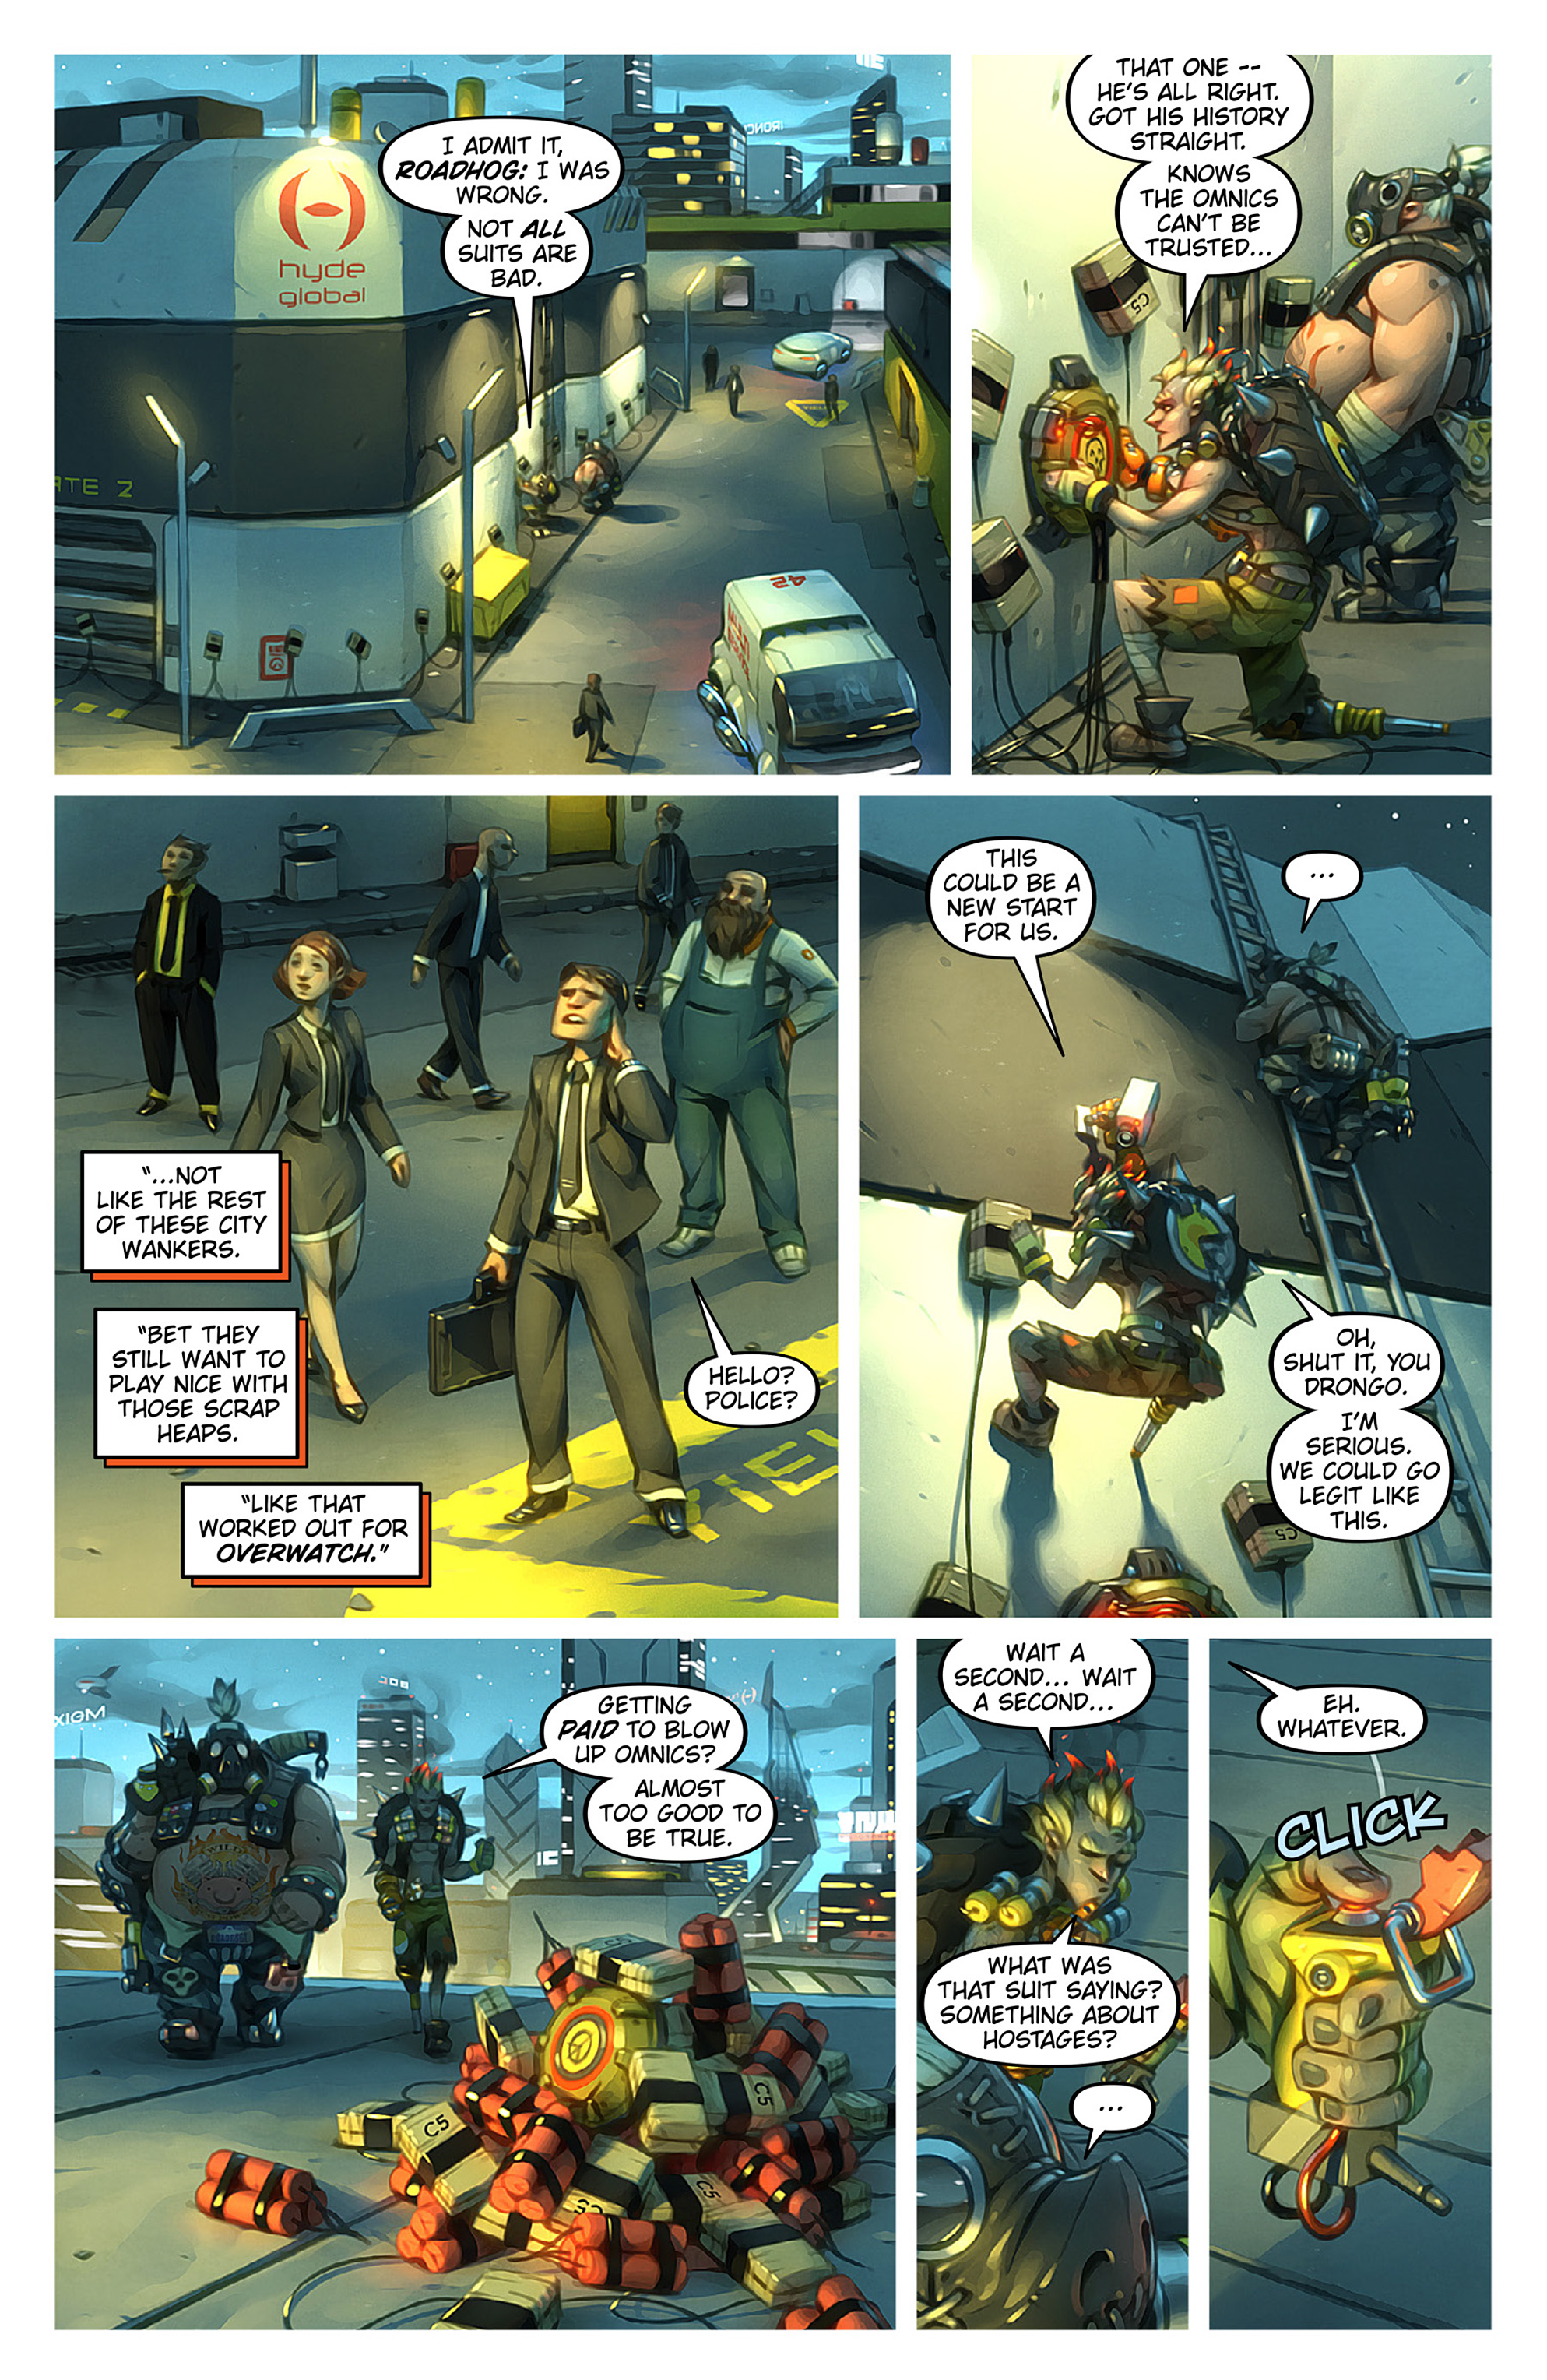 Overwatch (2016-): Chapter 3 - Page 4